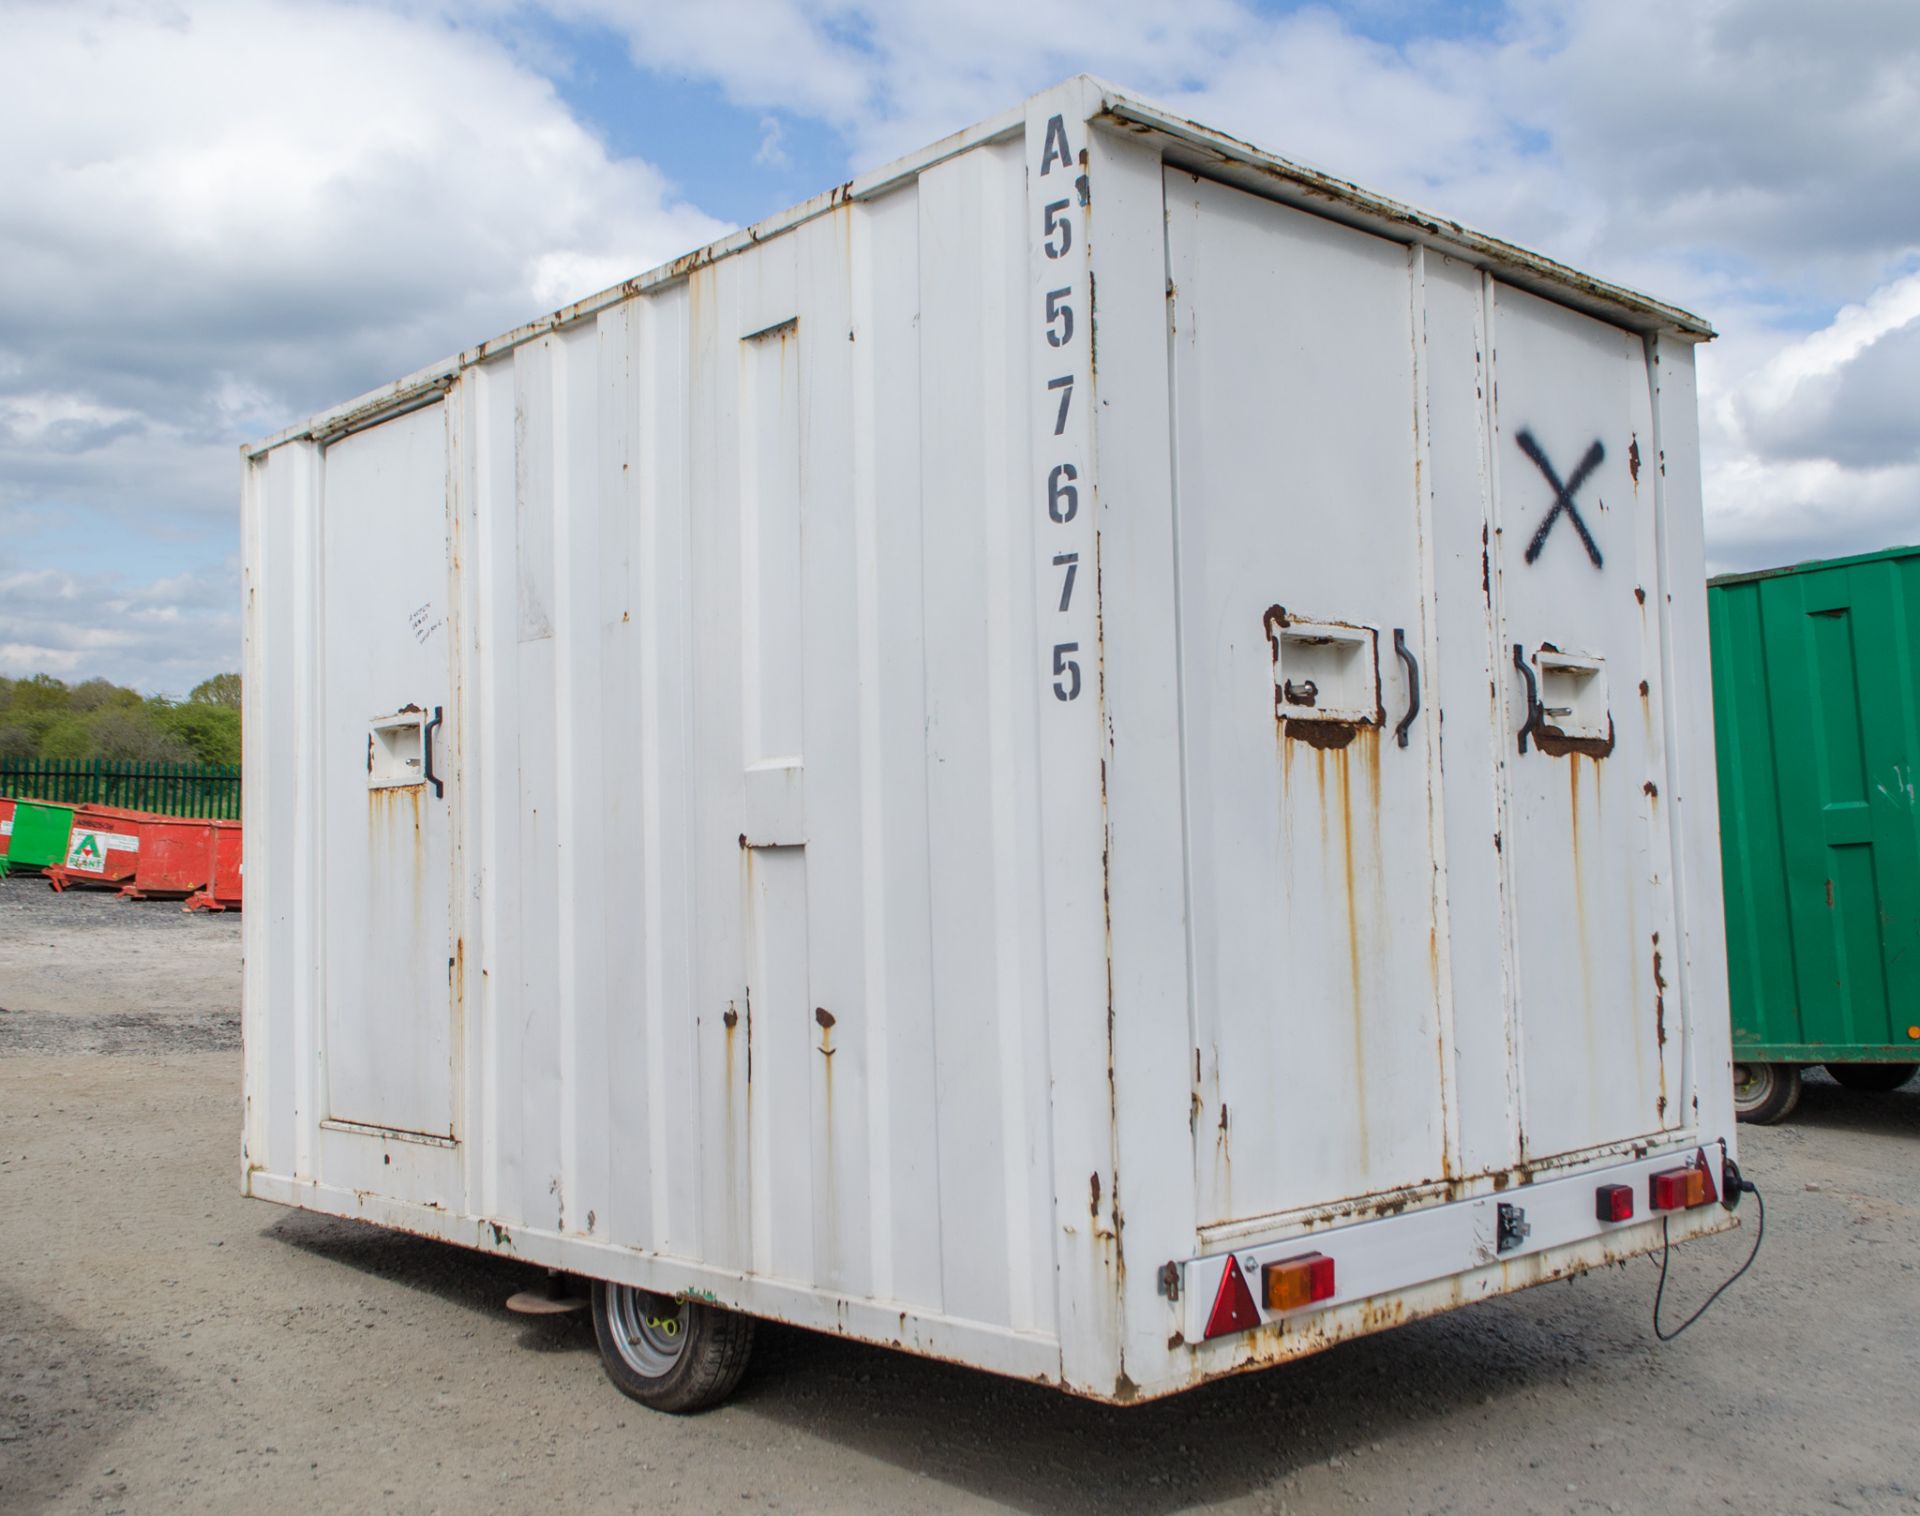 Groundhog 12 ft x 8 ft steel anti vandal mobile welfare unit Comprising of: Canteen, toilet & - Image 4 of 11